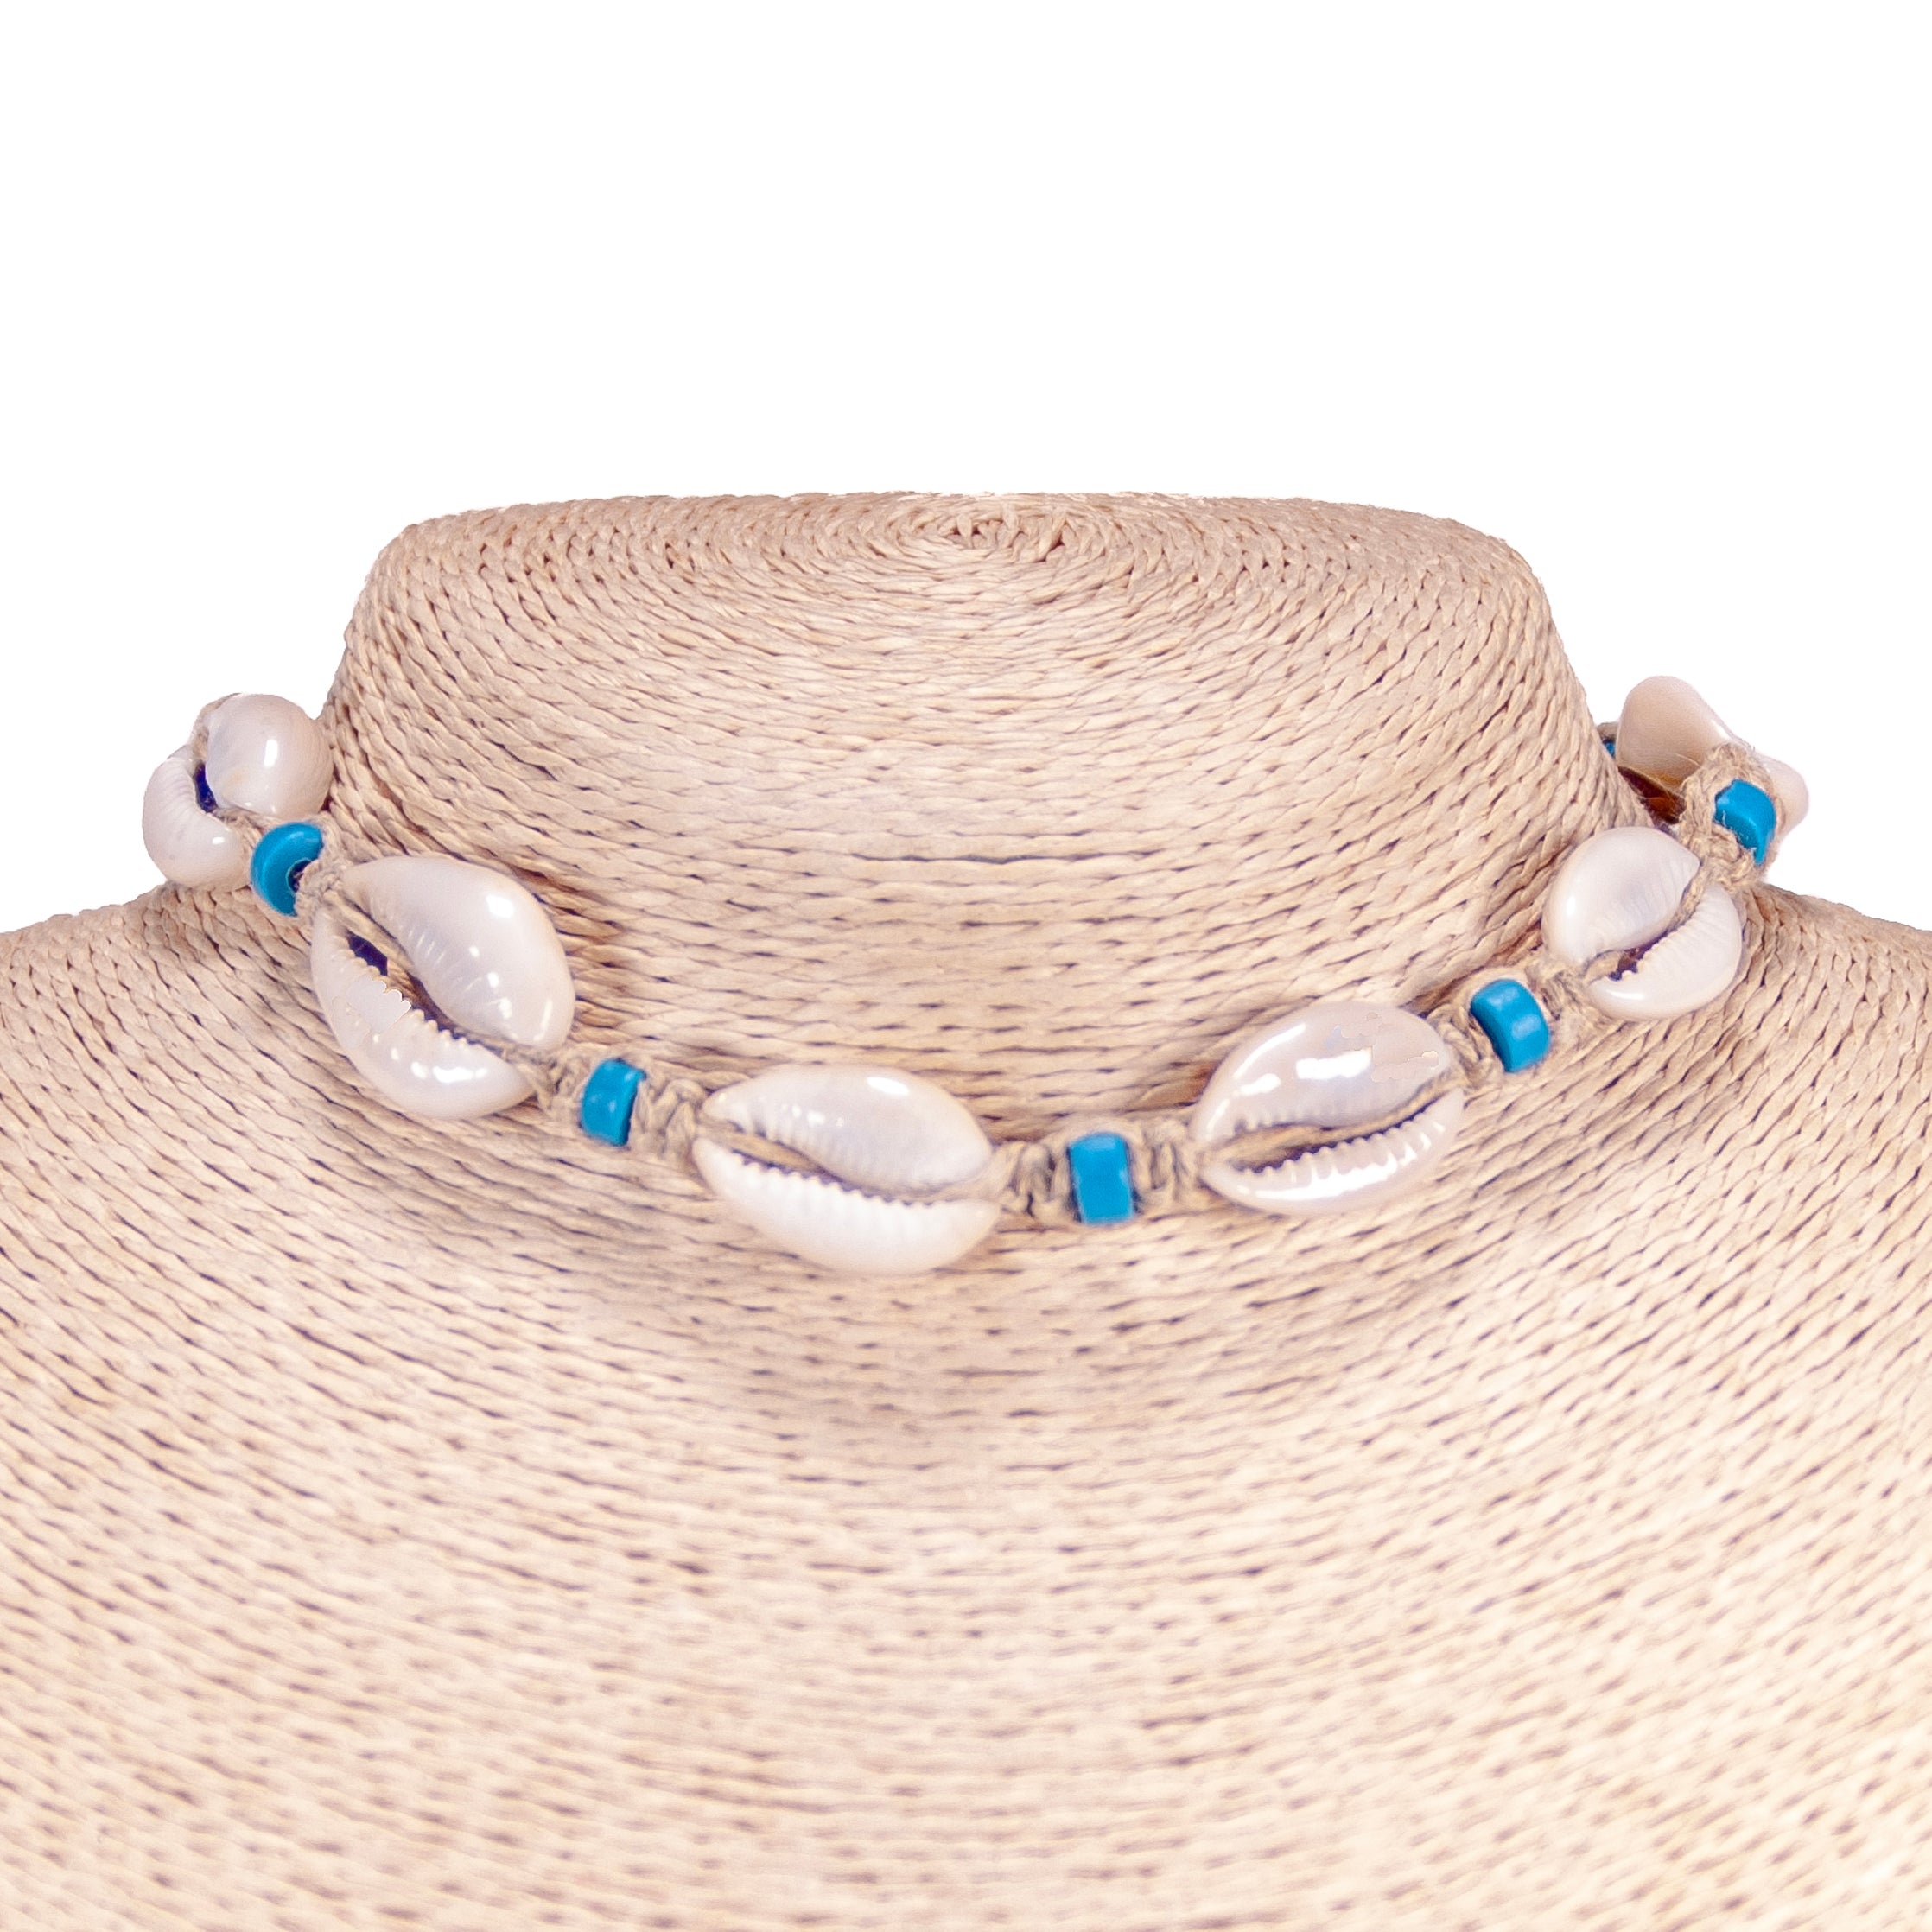 Hemp Choker Necklace with Cowrie Shells and Light Blue Fimo Beads